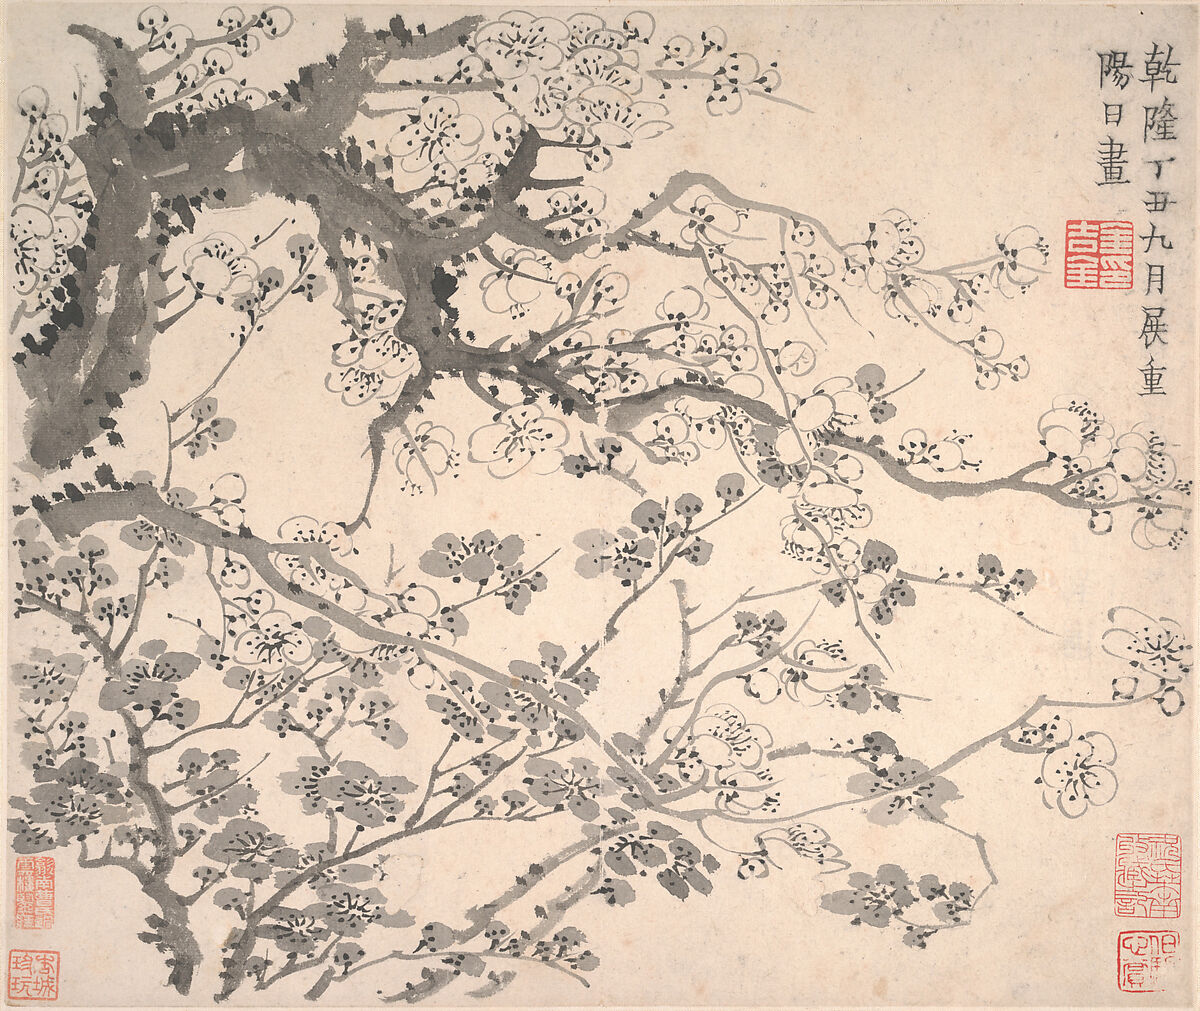 Plum blossoms, Jin Nong, Album of twelve leaves; ink on paper, China